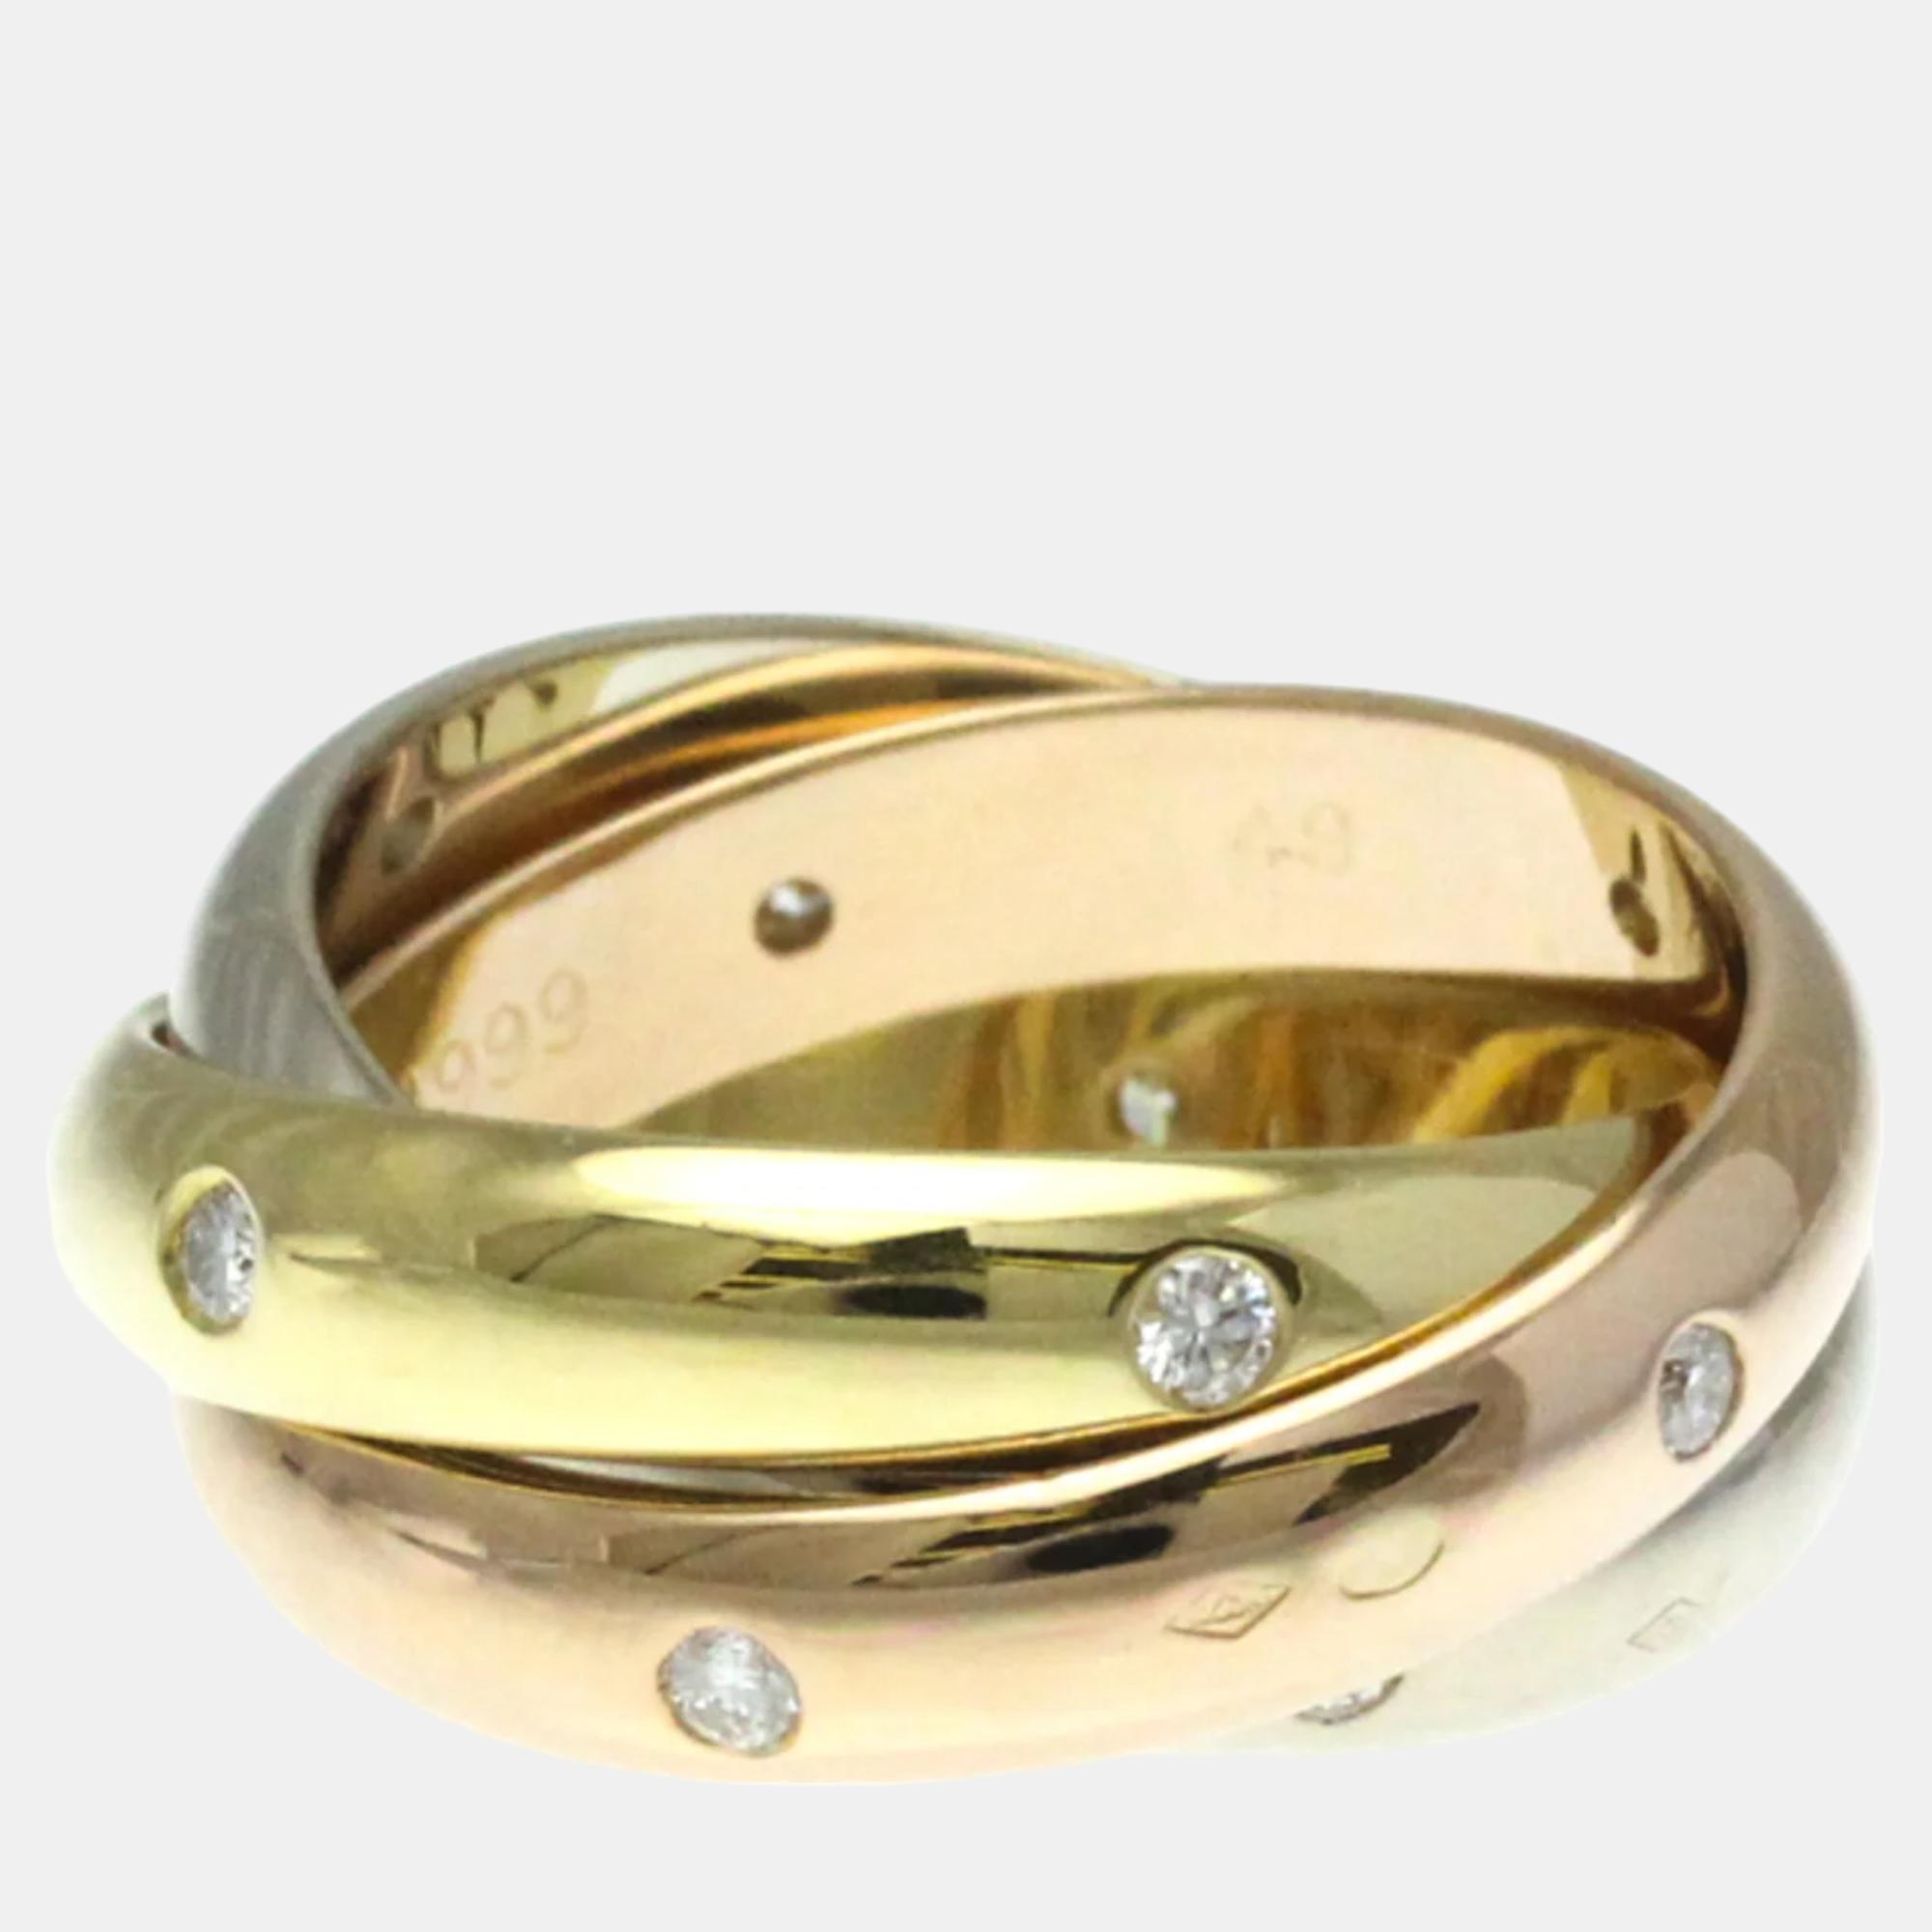 Cartier 18k rose, white, yellow gold and diamond trinity band ring eu 49